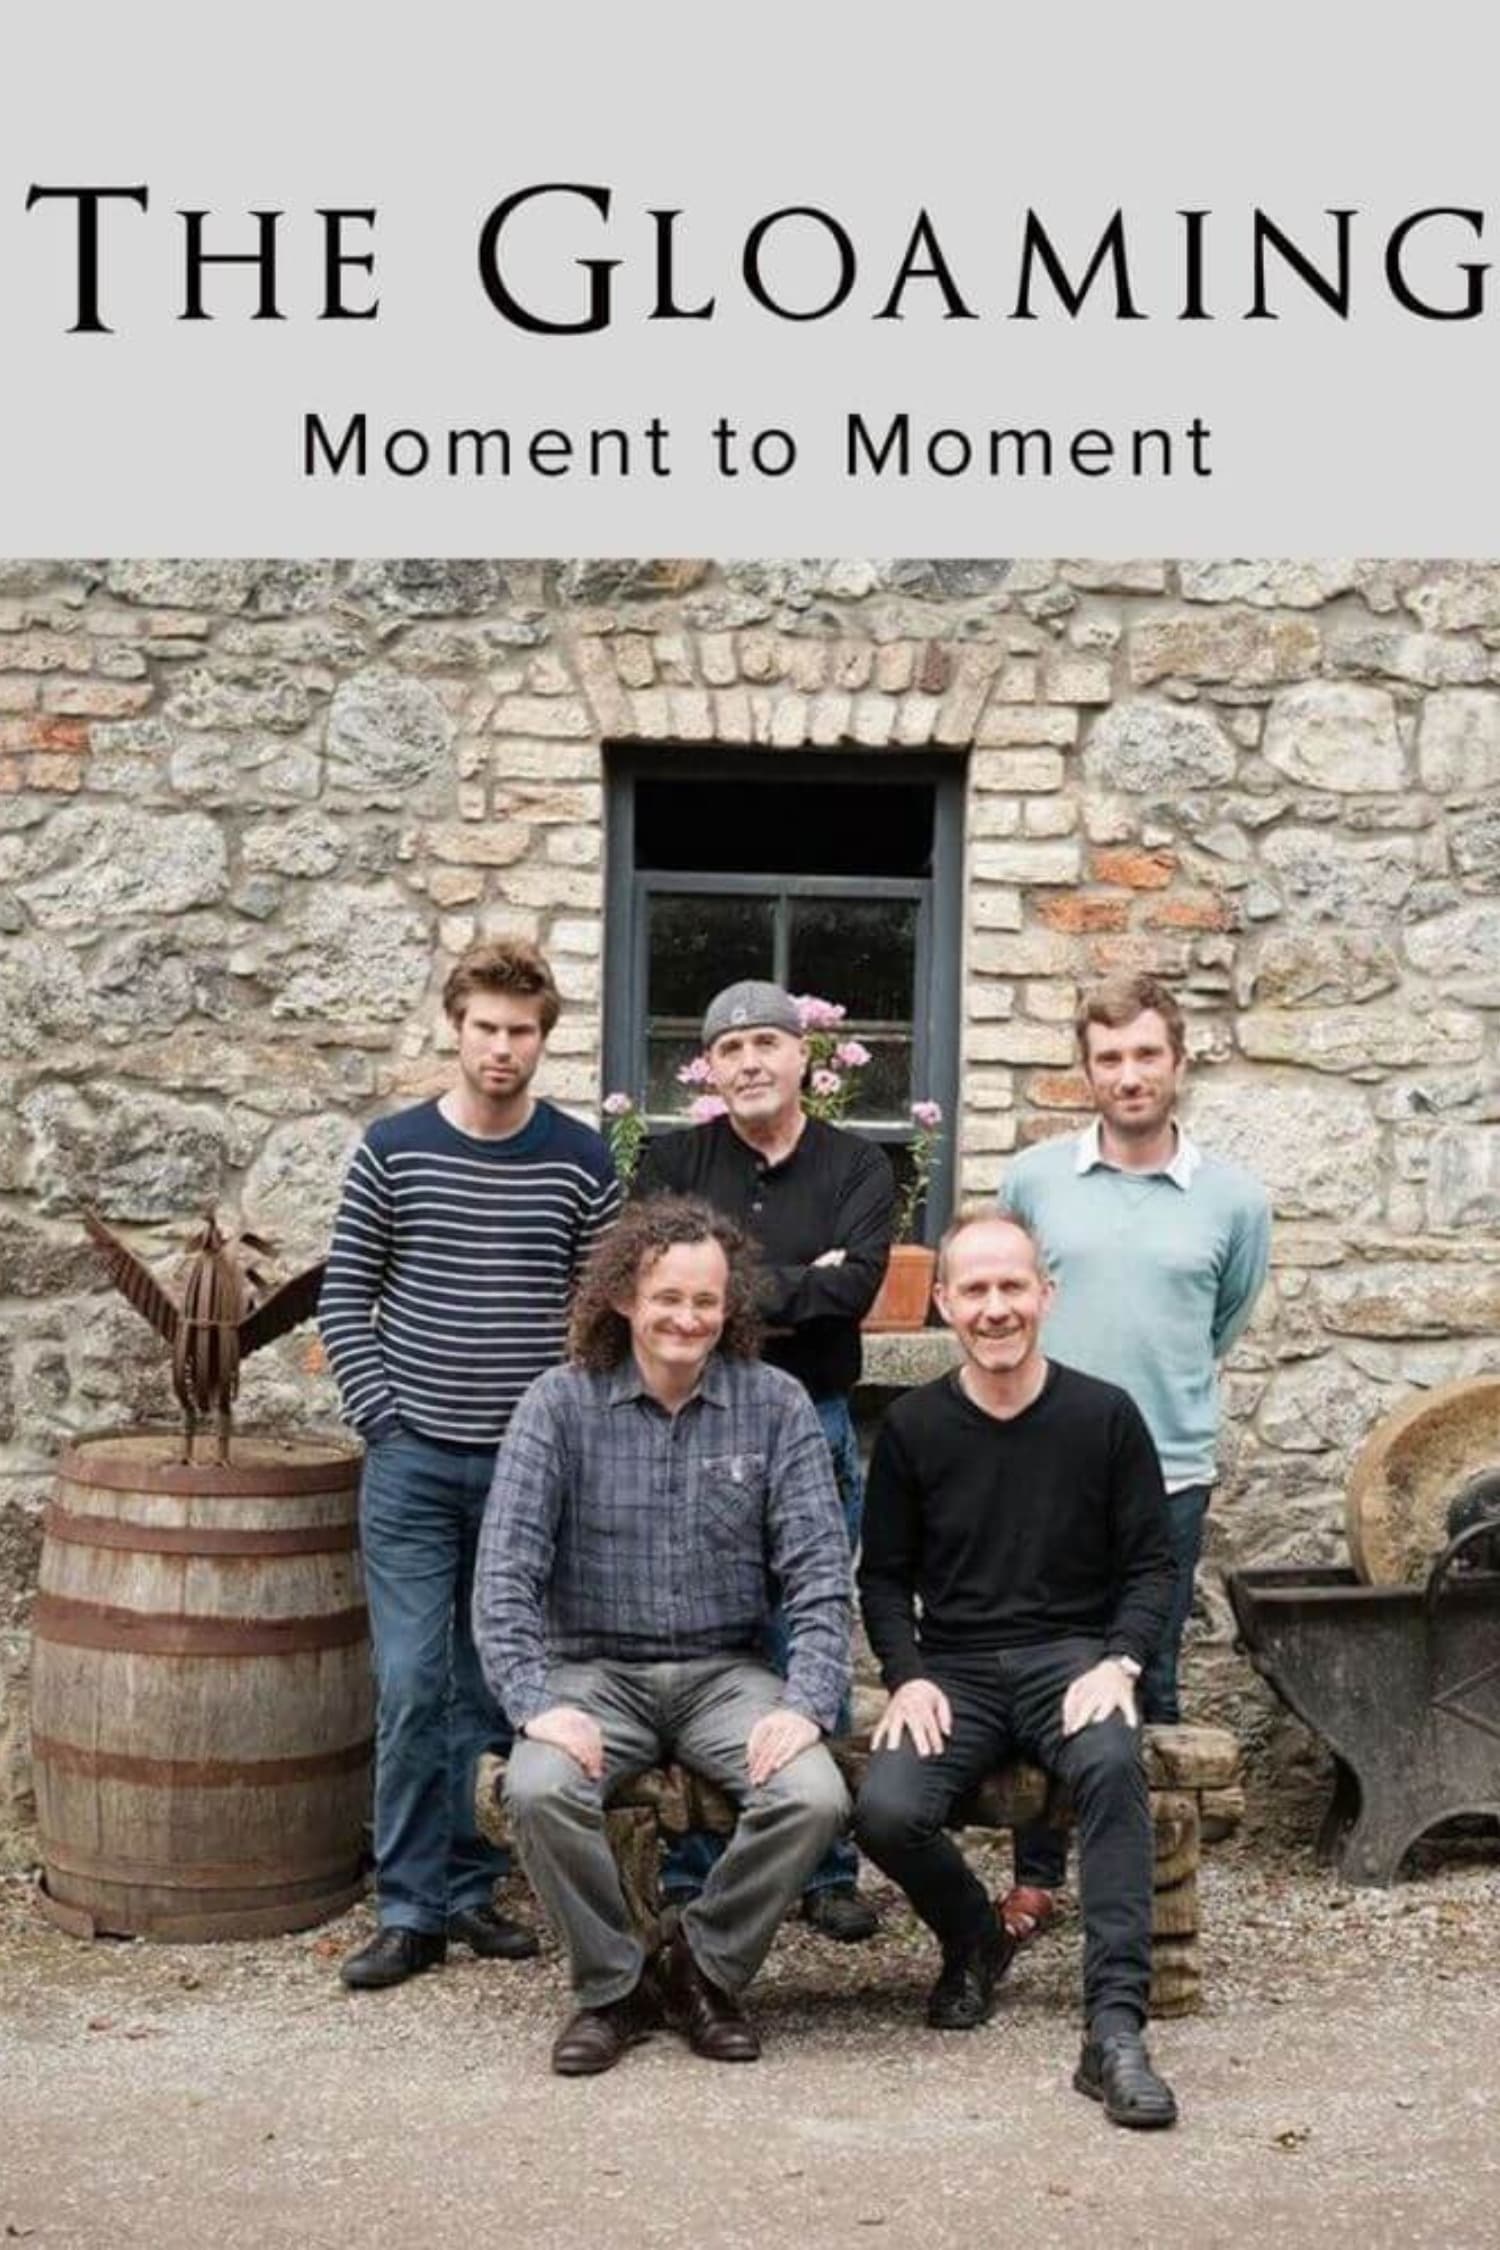 The Gloaming: Moment to Moment